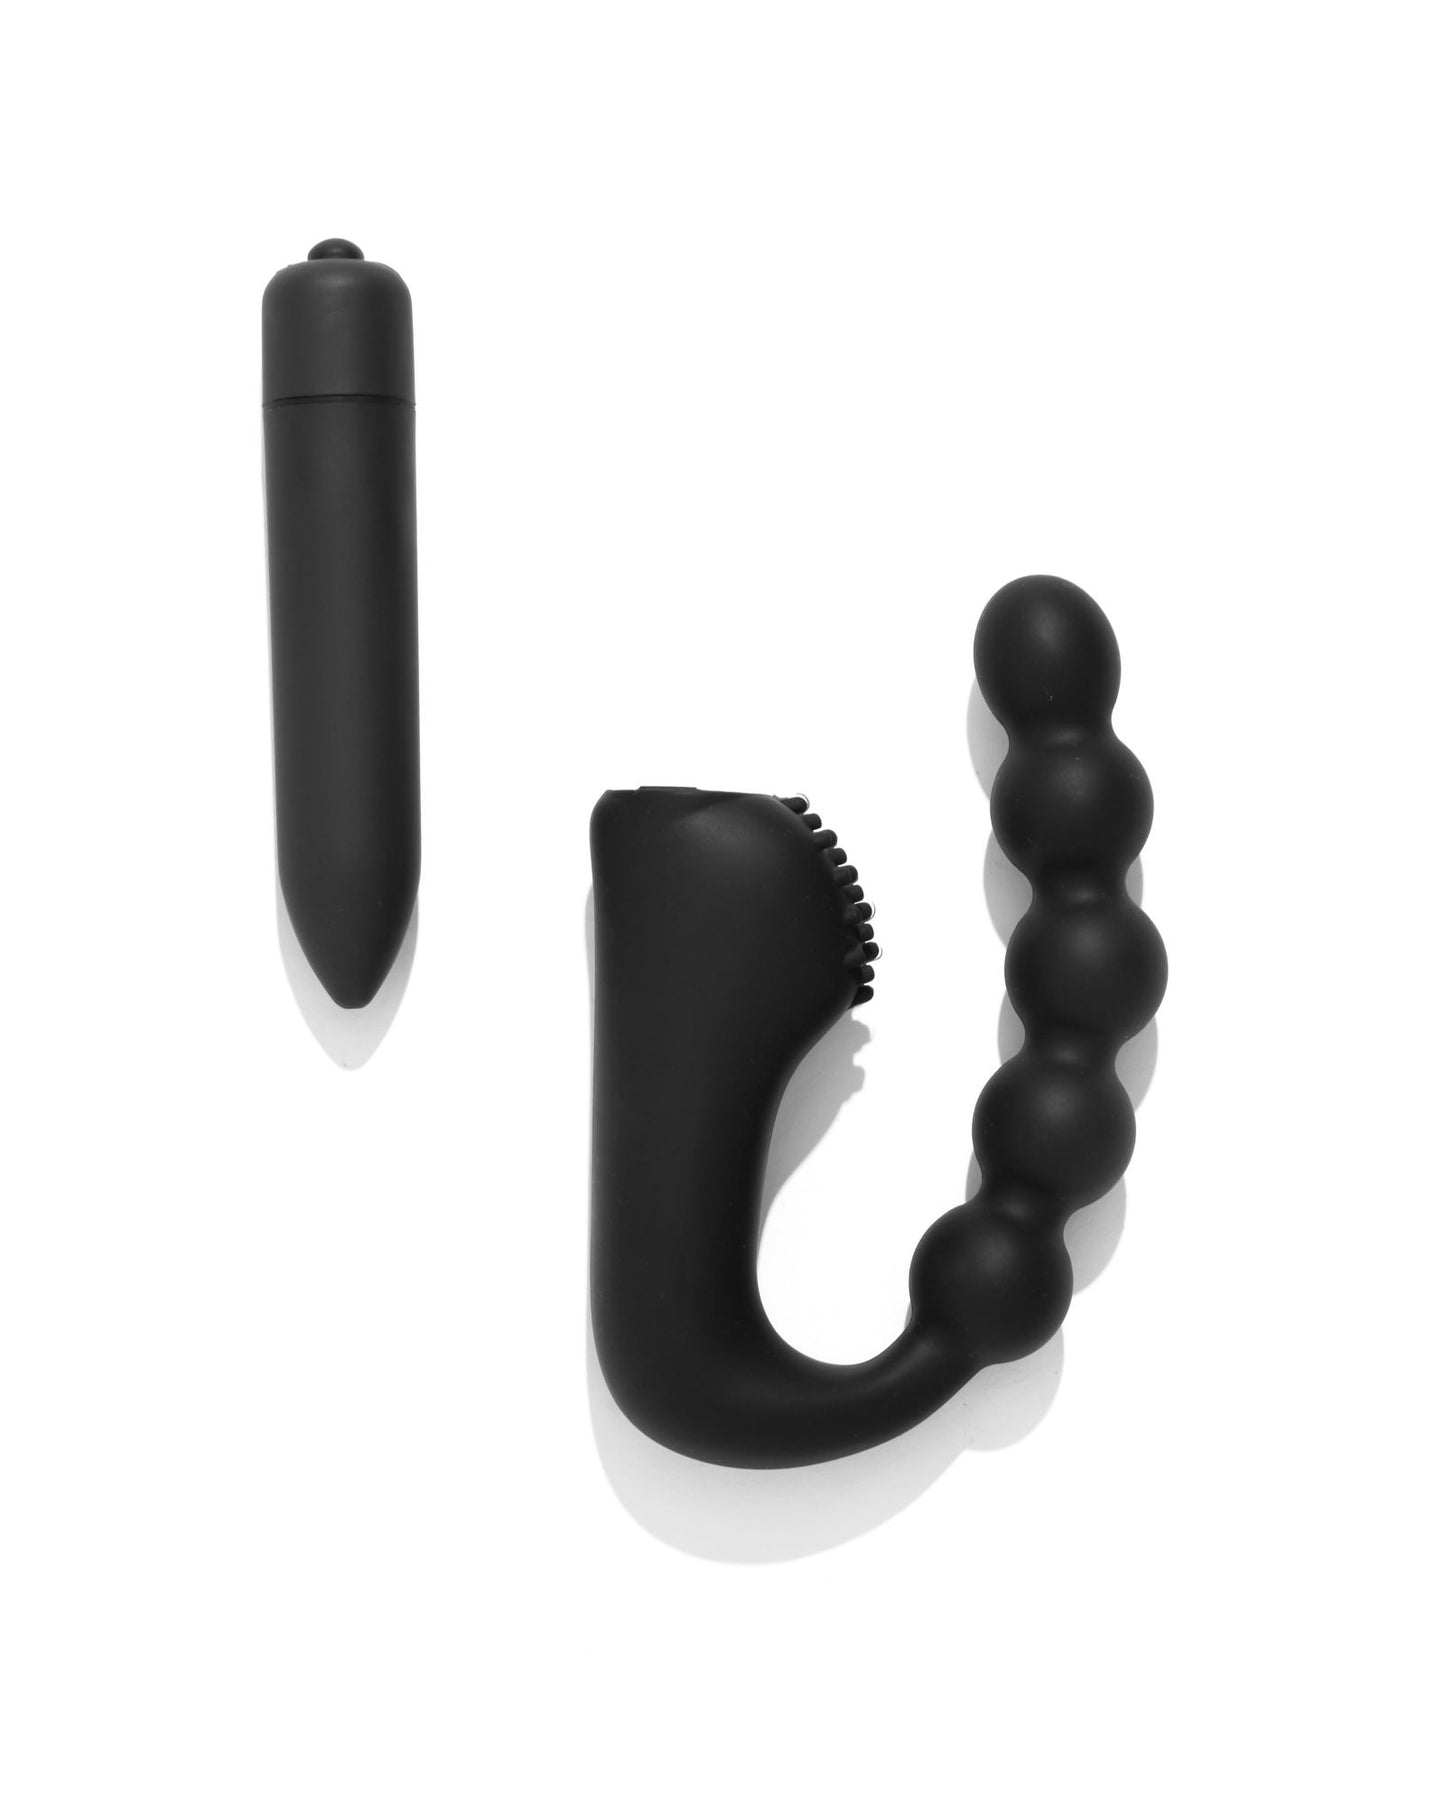 Sangya 21 - Beaded Silicone sleeve with a Bullet Massager